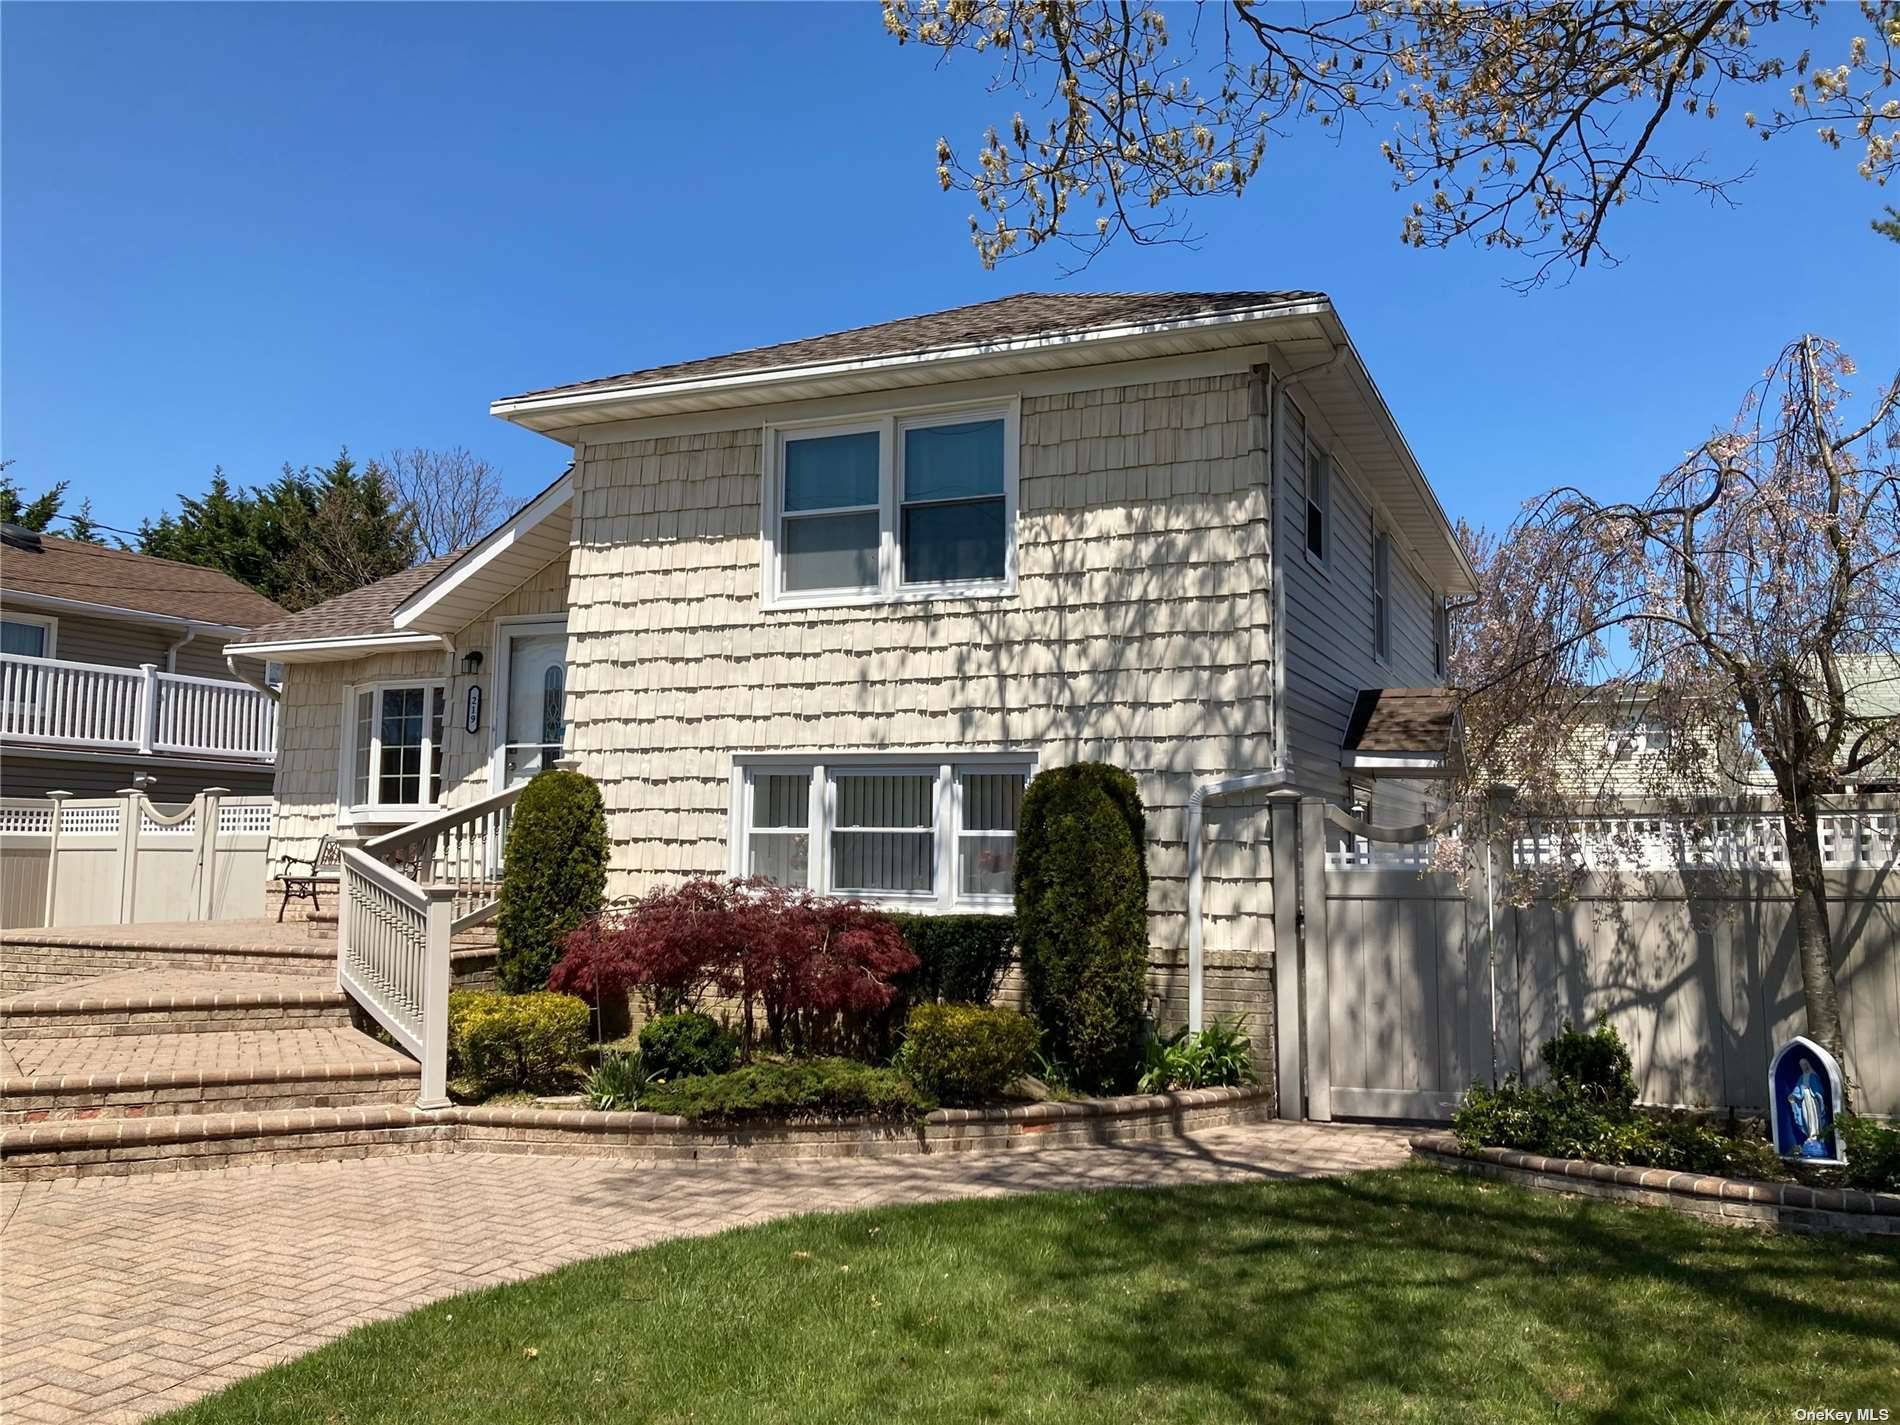 Mint and bright split level in the beautiful Village of Massapequa Park in the Massapequa School District, close to the preserve.